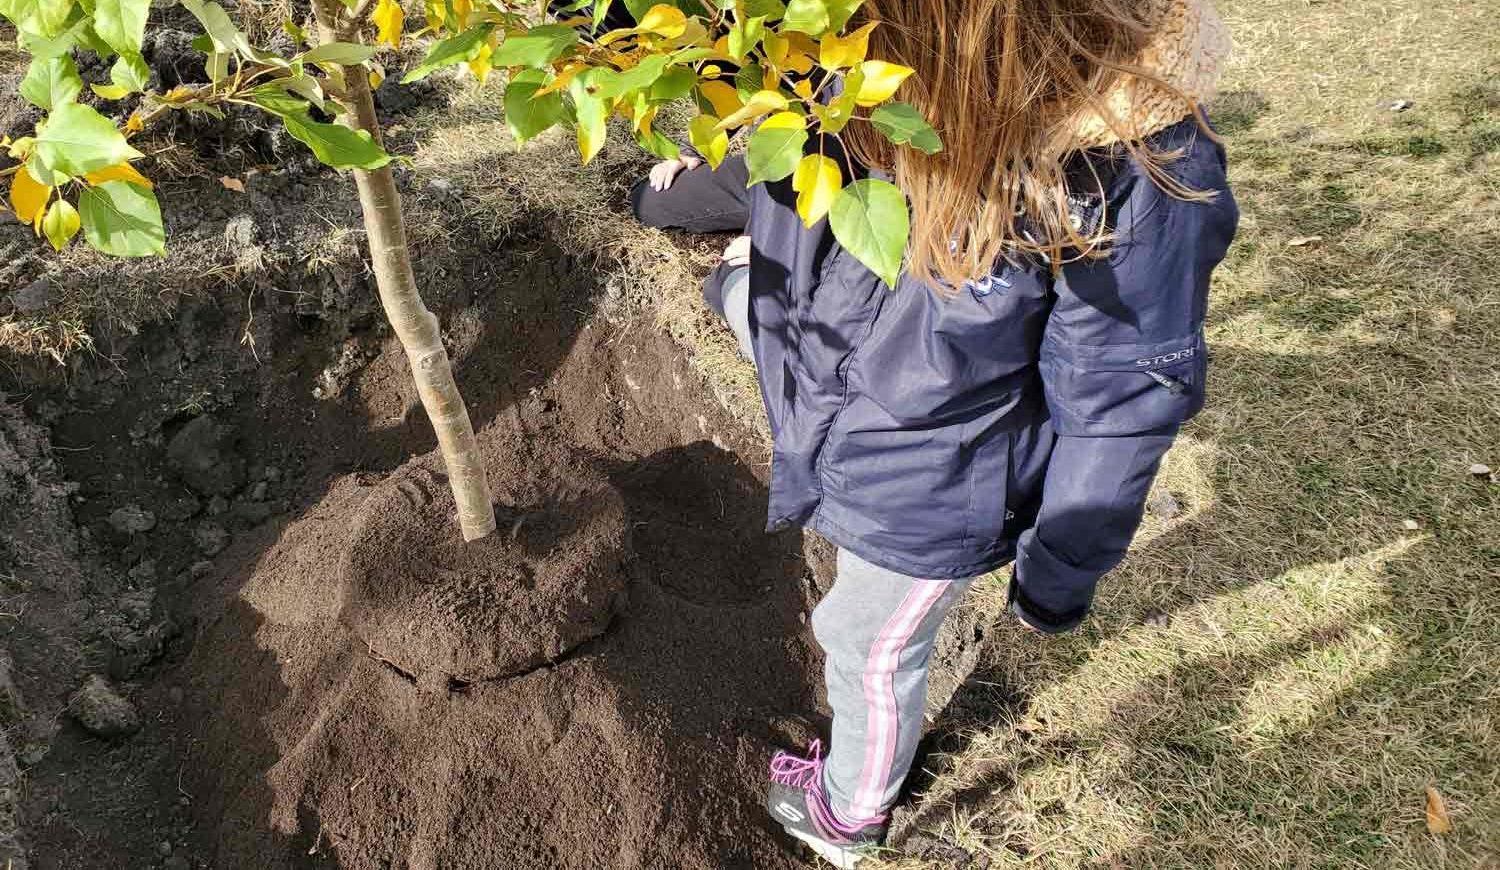 http://Young%20girl%20planting%20a%20tree.